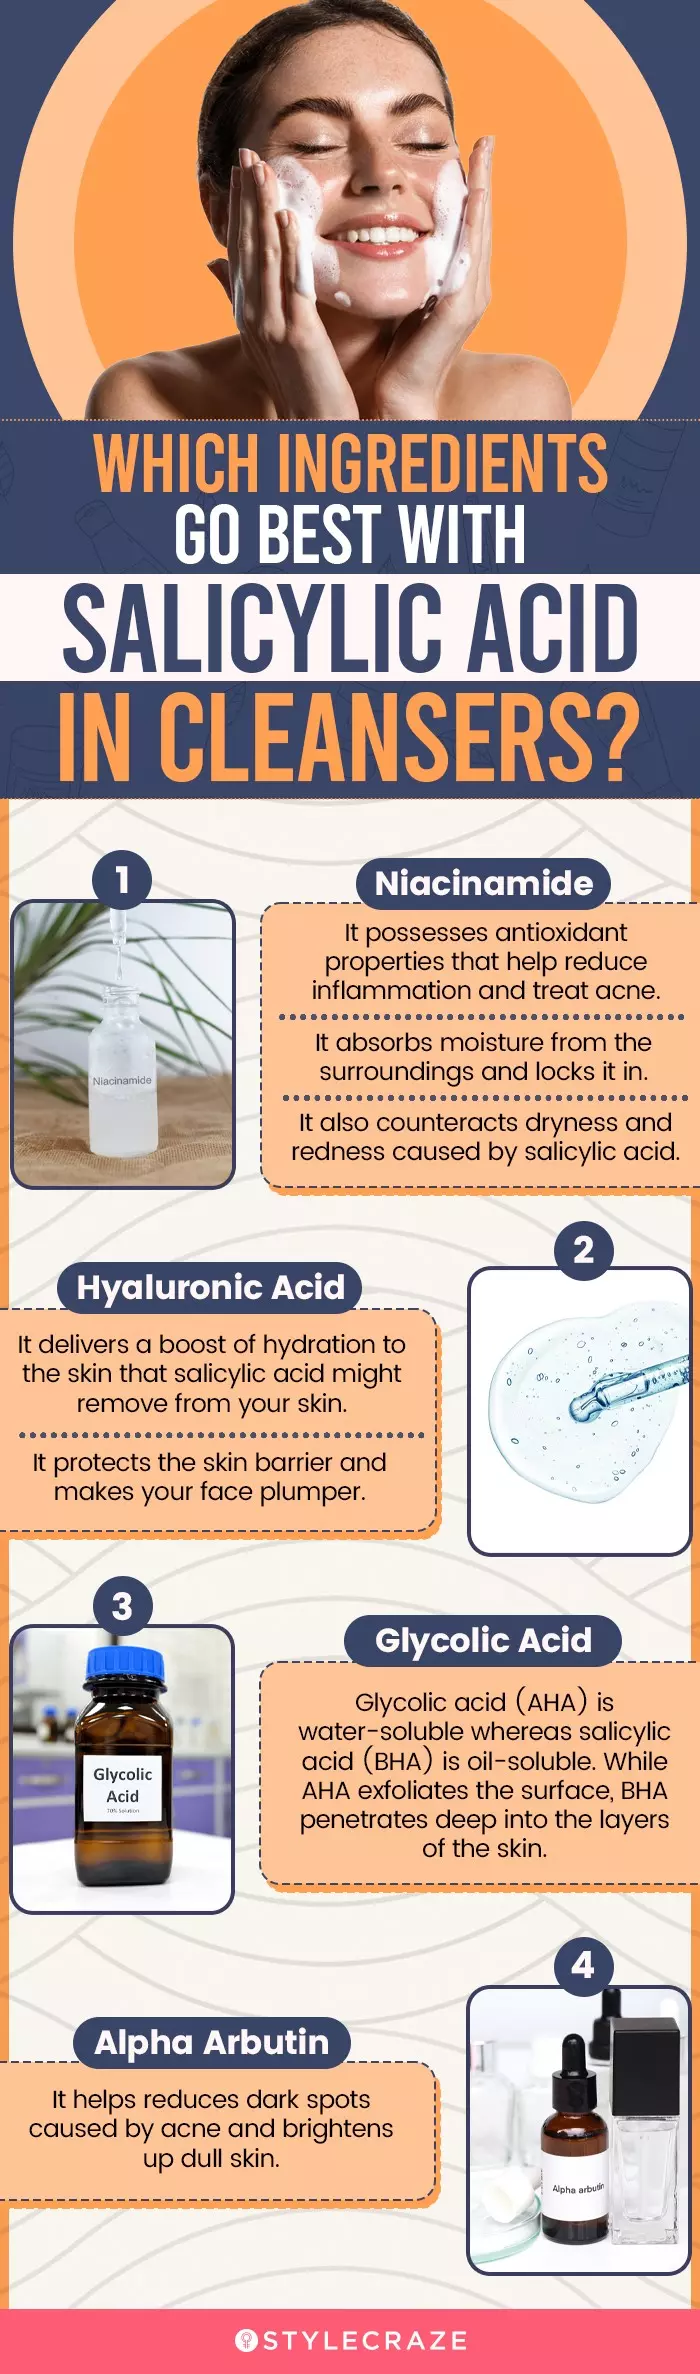 Which Ingredients Go Best With Salicylic Acid In Cleansers? (infographic)